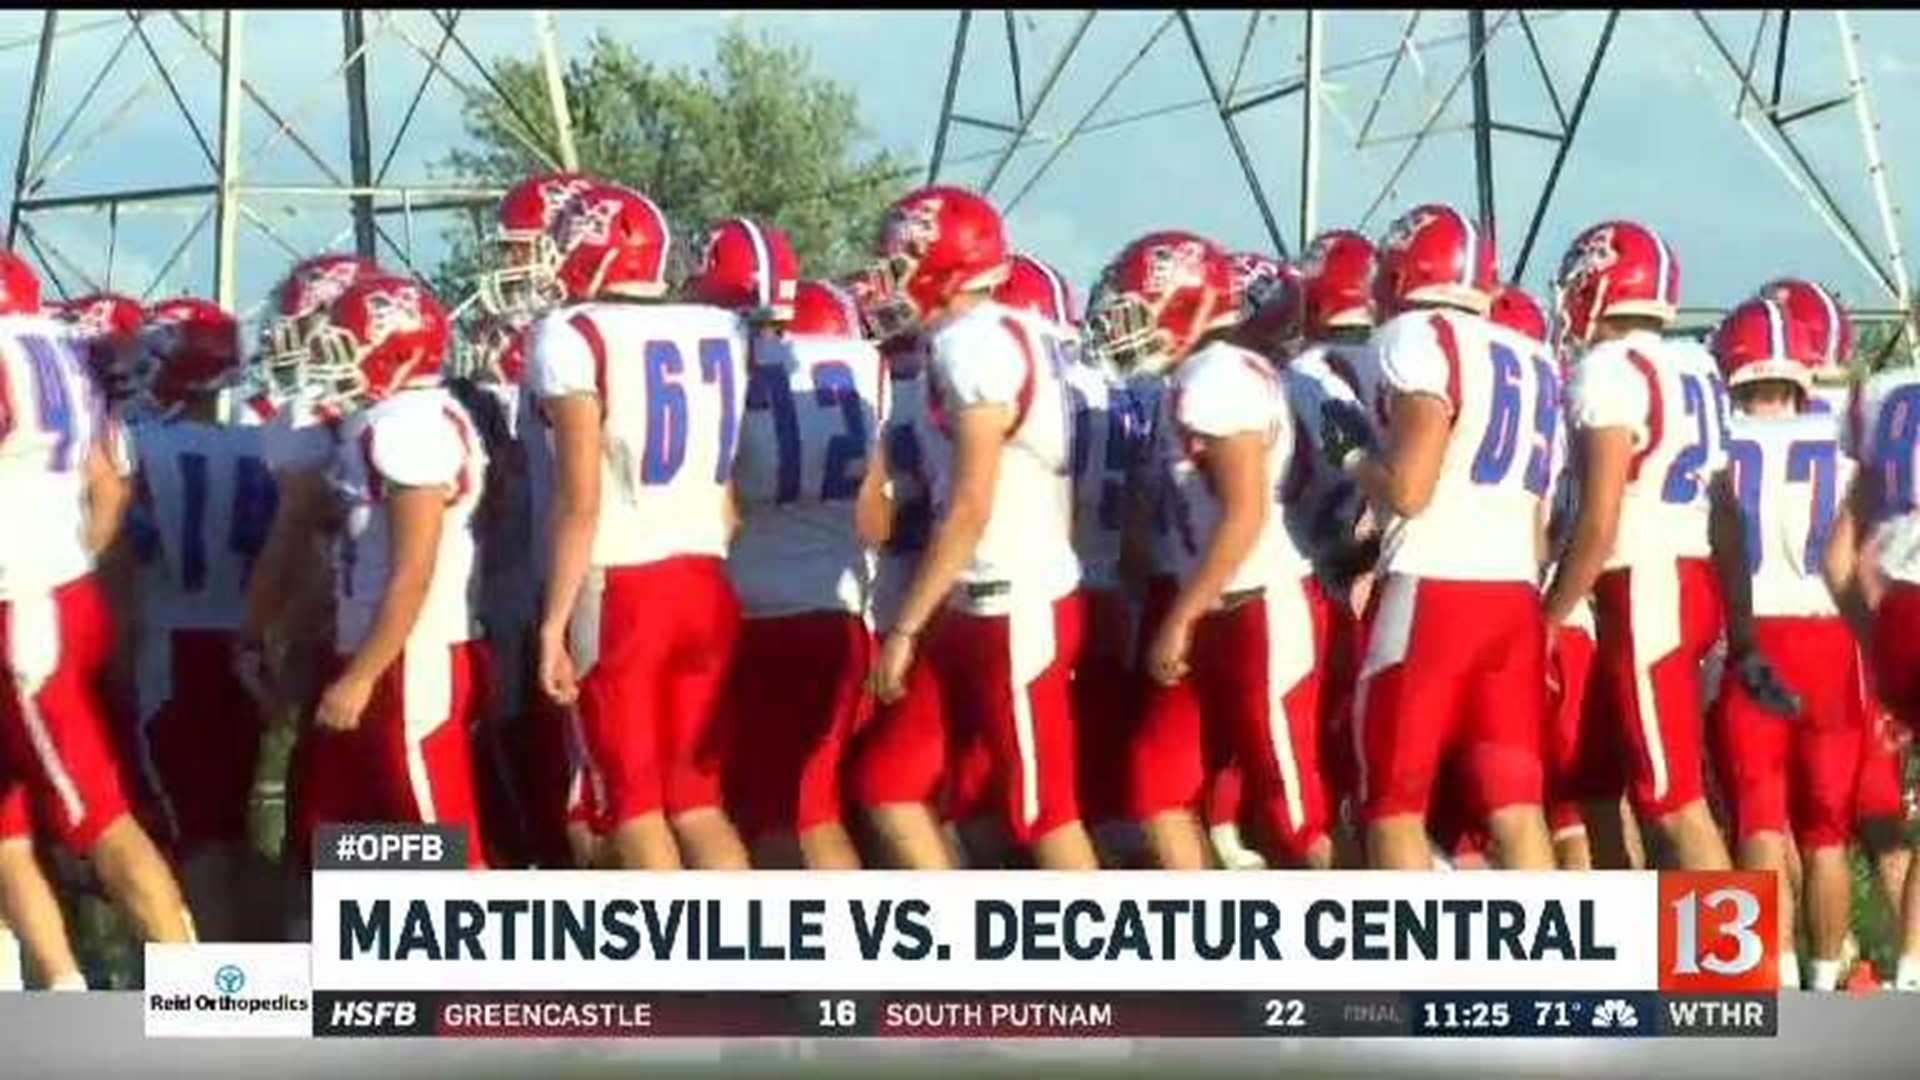 Martinsville at Decatur Central